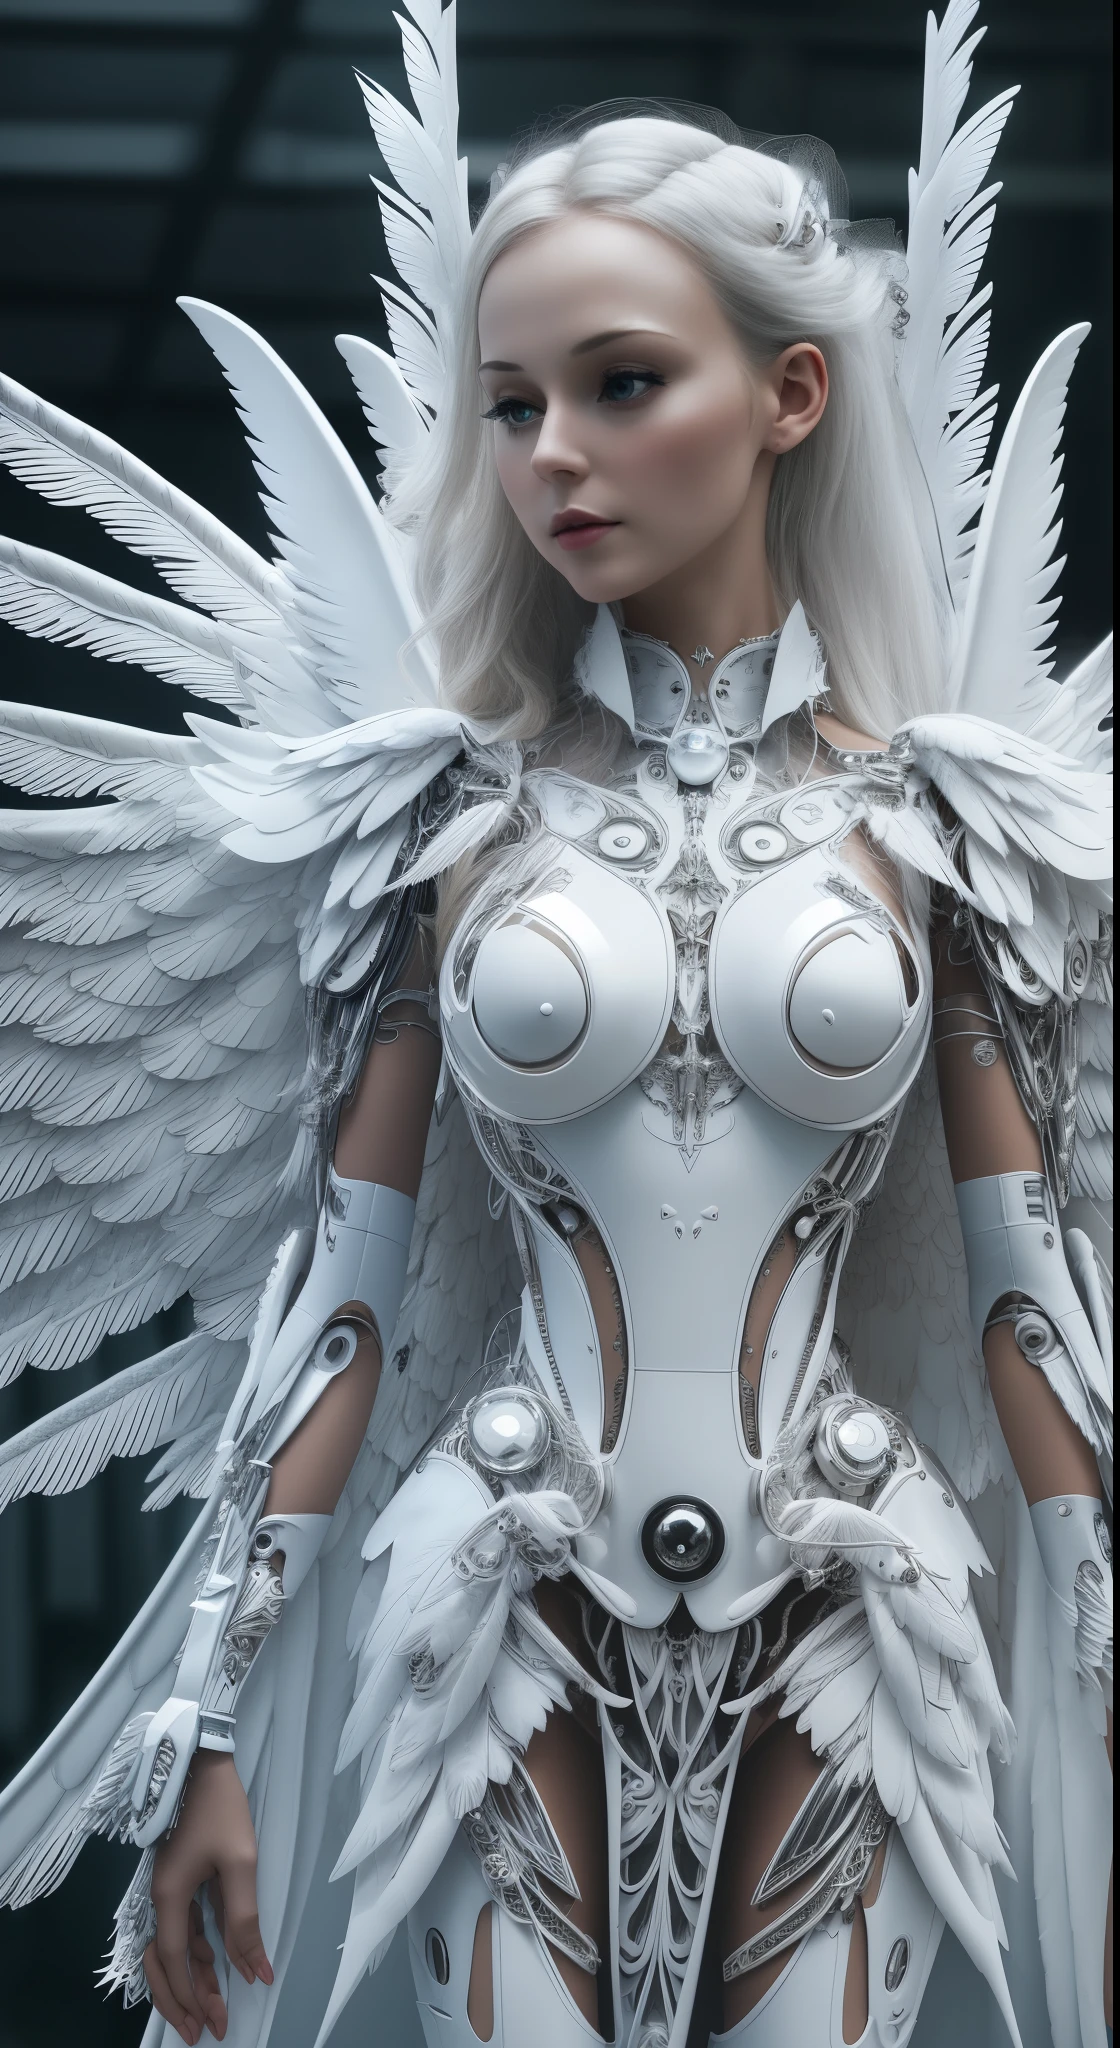 Close-up of a woman in a white dress with wings, full body angel, futuristic robot angel, amazing angel wings, angel knight gothic girl, angel in plastic armor, intricate costume designs, As a mysterious Valkyrie, Its whole body is made of white feathers,, futuristic and fantastic, white wings, beautiful angel wings, steampunk angel, beautiful cyborg angel girl, graceful wings